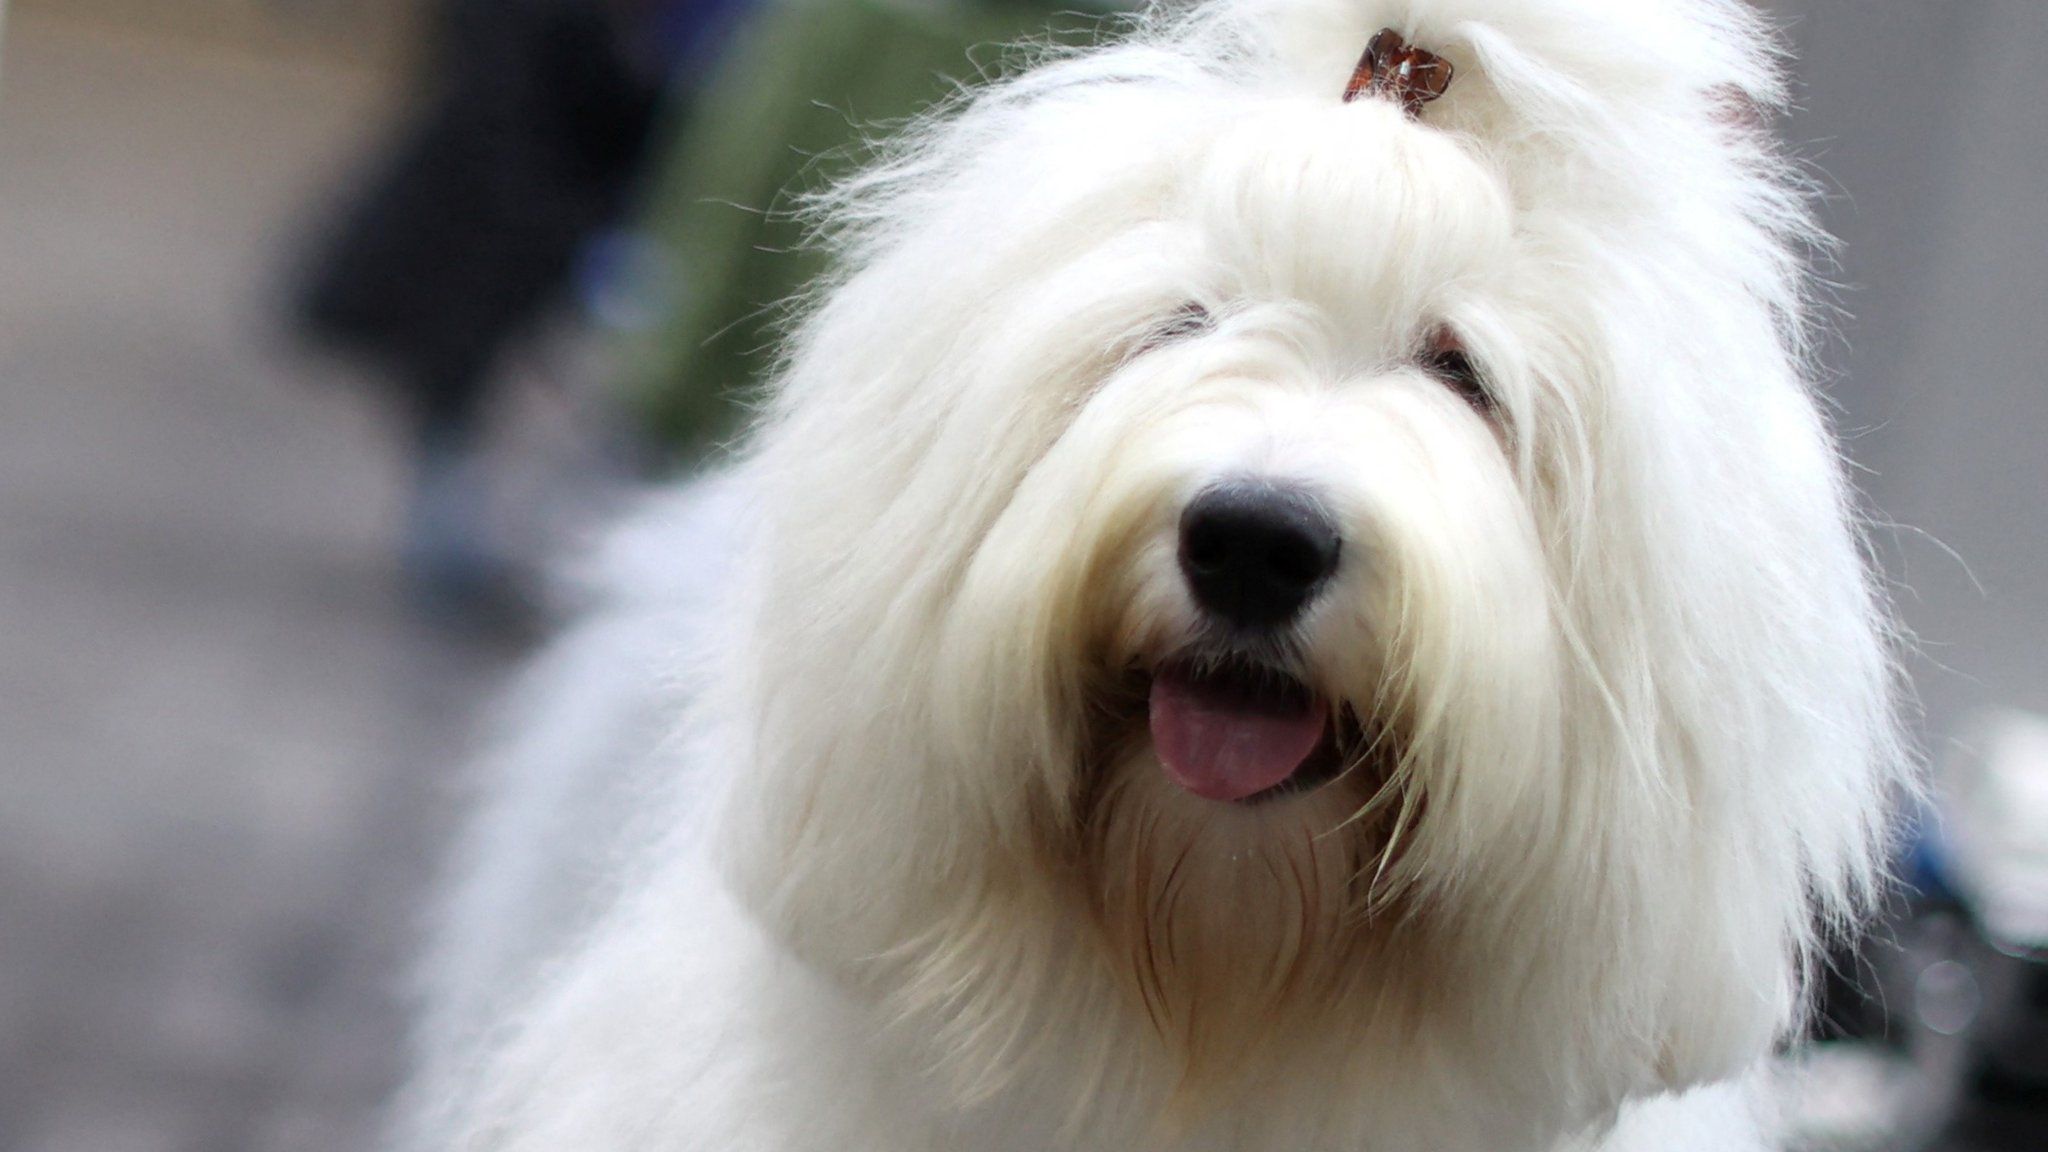 An Old English Sheepdog is seen the first day of the Crufts Dog Show